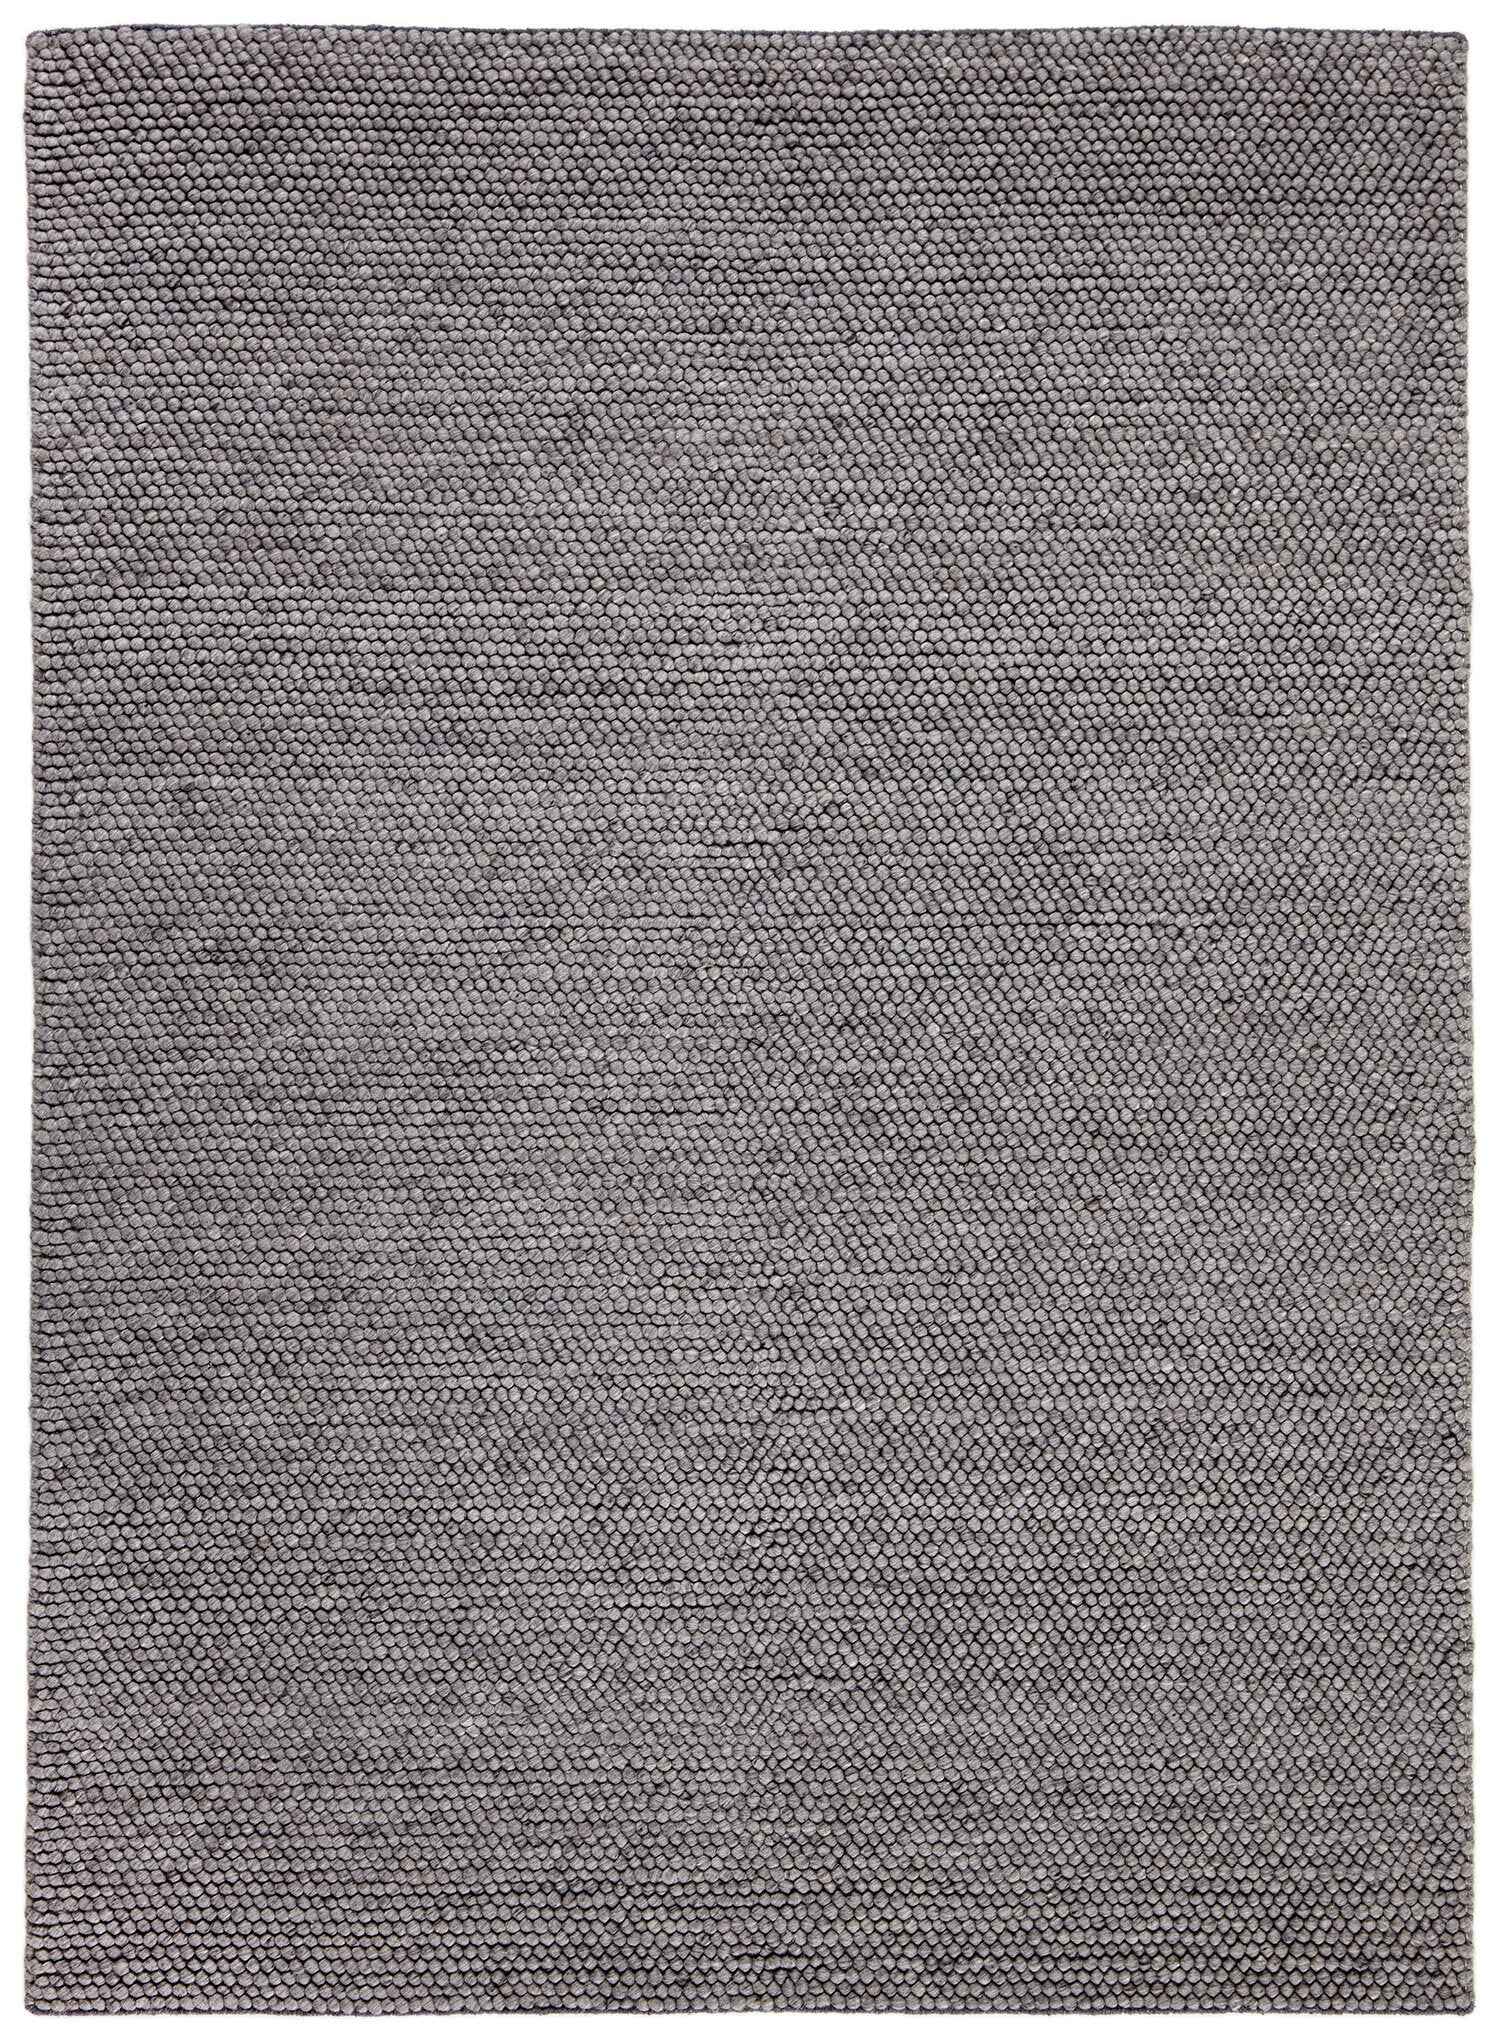 200x140 cm  Indian Wool Multicolor Rug-UD 782, Antracite